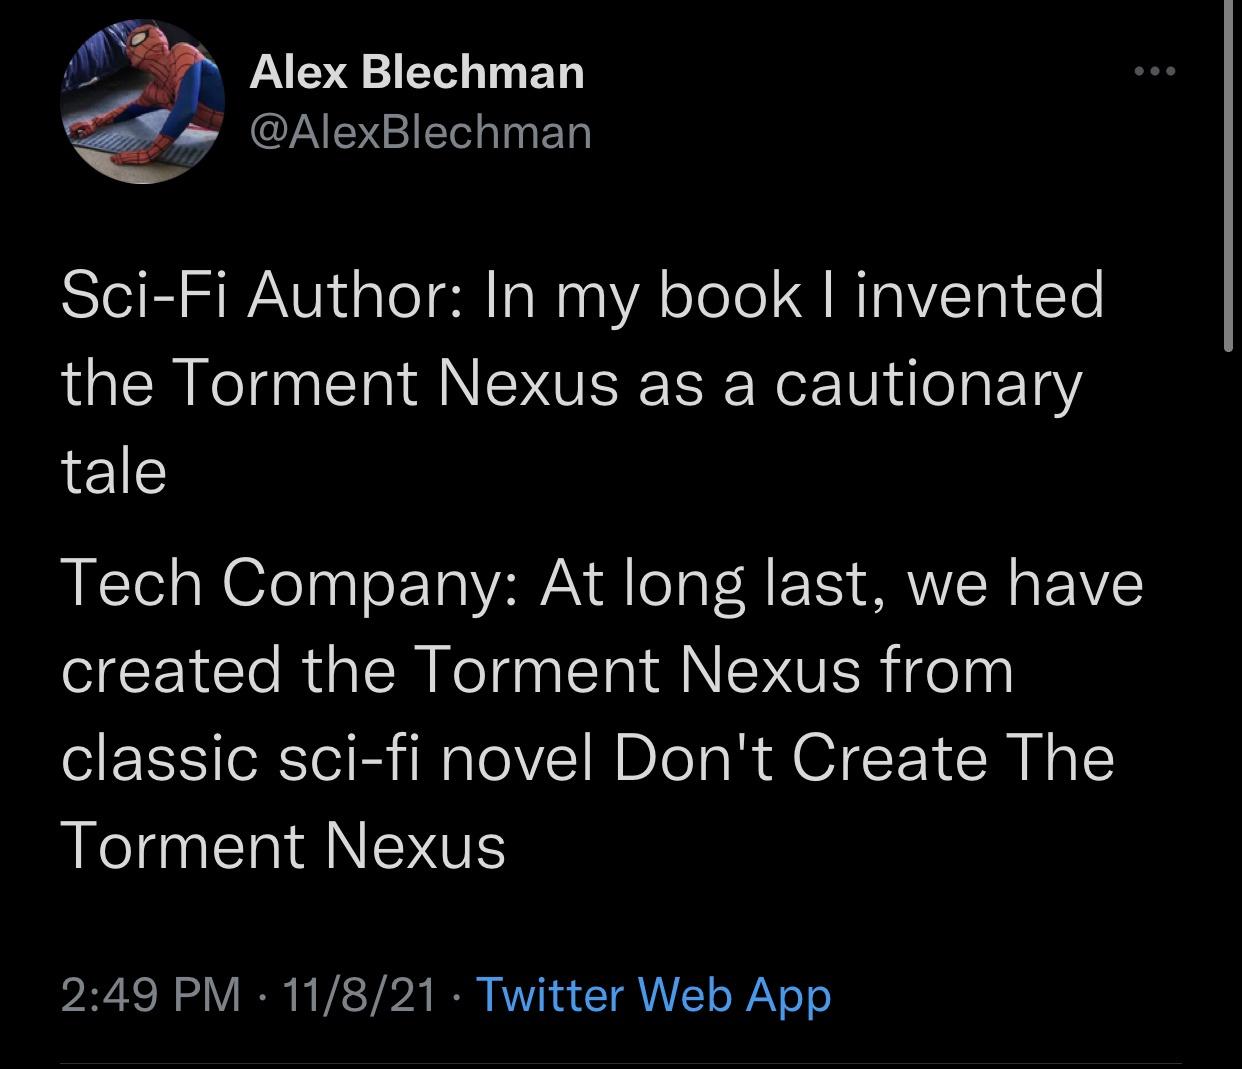 new memes - The Bot - Alex Blechman SciFi Author In my book I invented the Torment Nexus as a cautionary tale Tech Company At long last, we have created the Torment Nexus from classic scifi novel Don't Create The Torment Nexus 11821 Twitter Web App